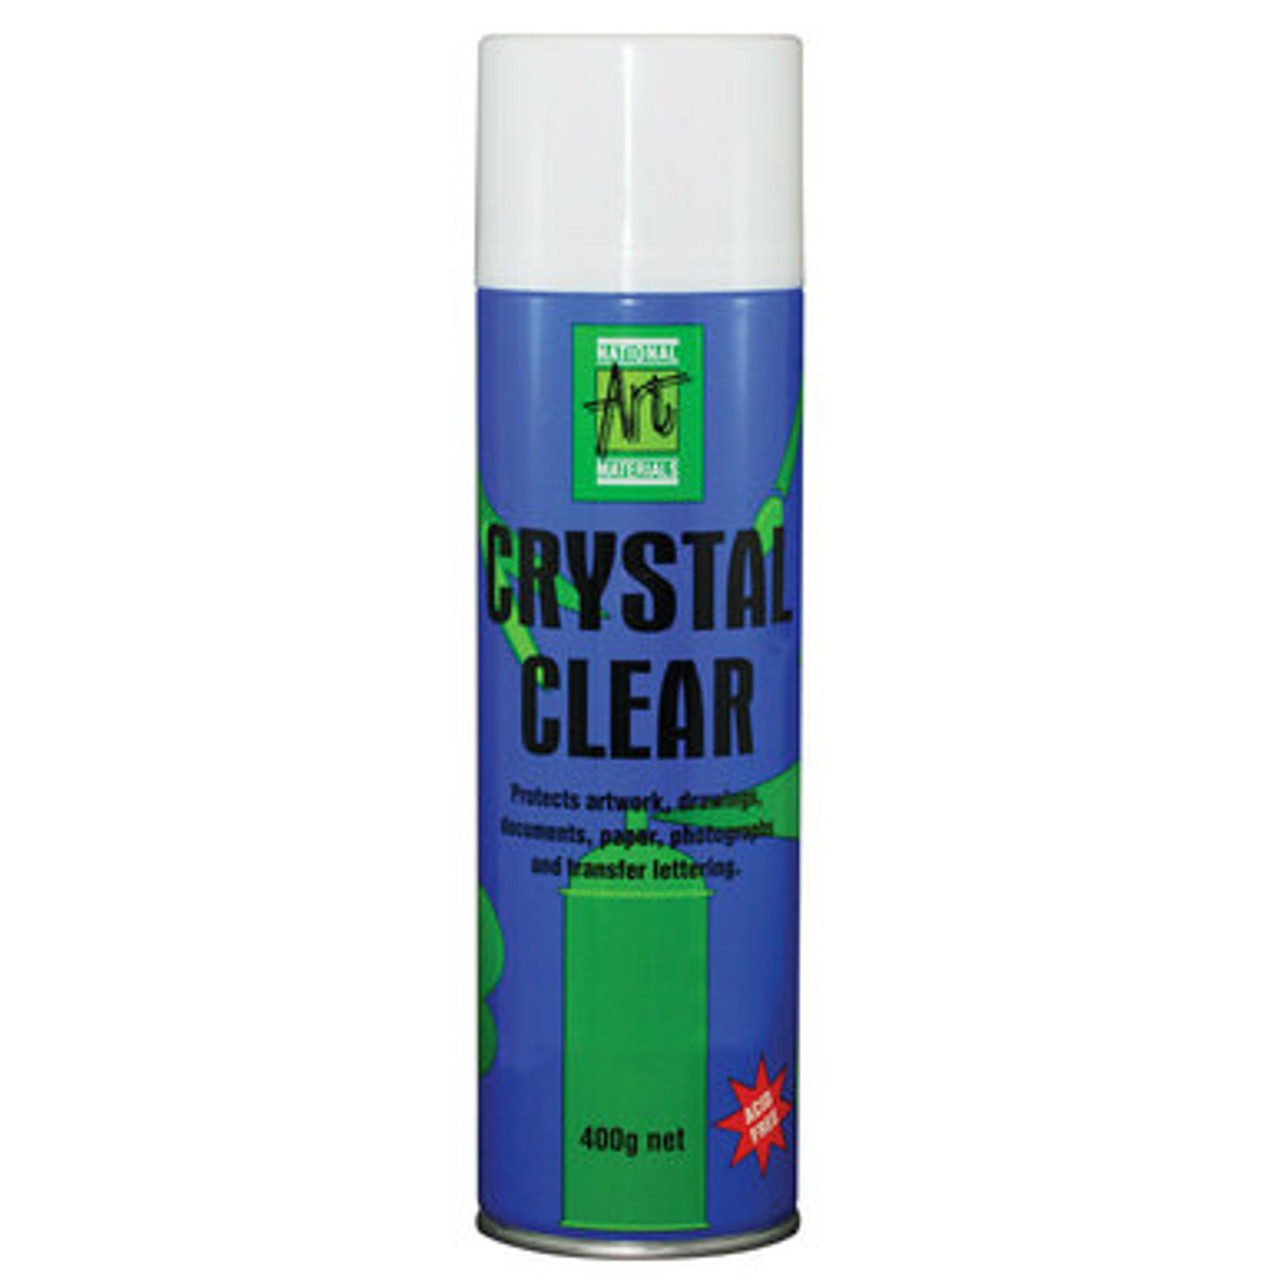 Crystal Clear Spray Sealant for Paper 400g